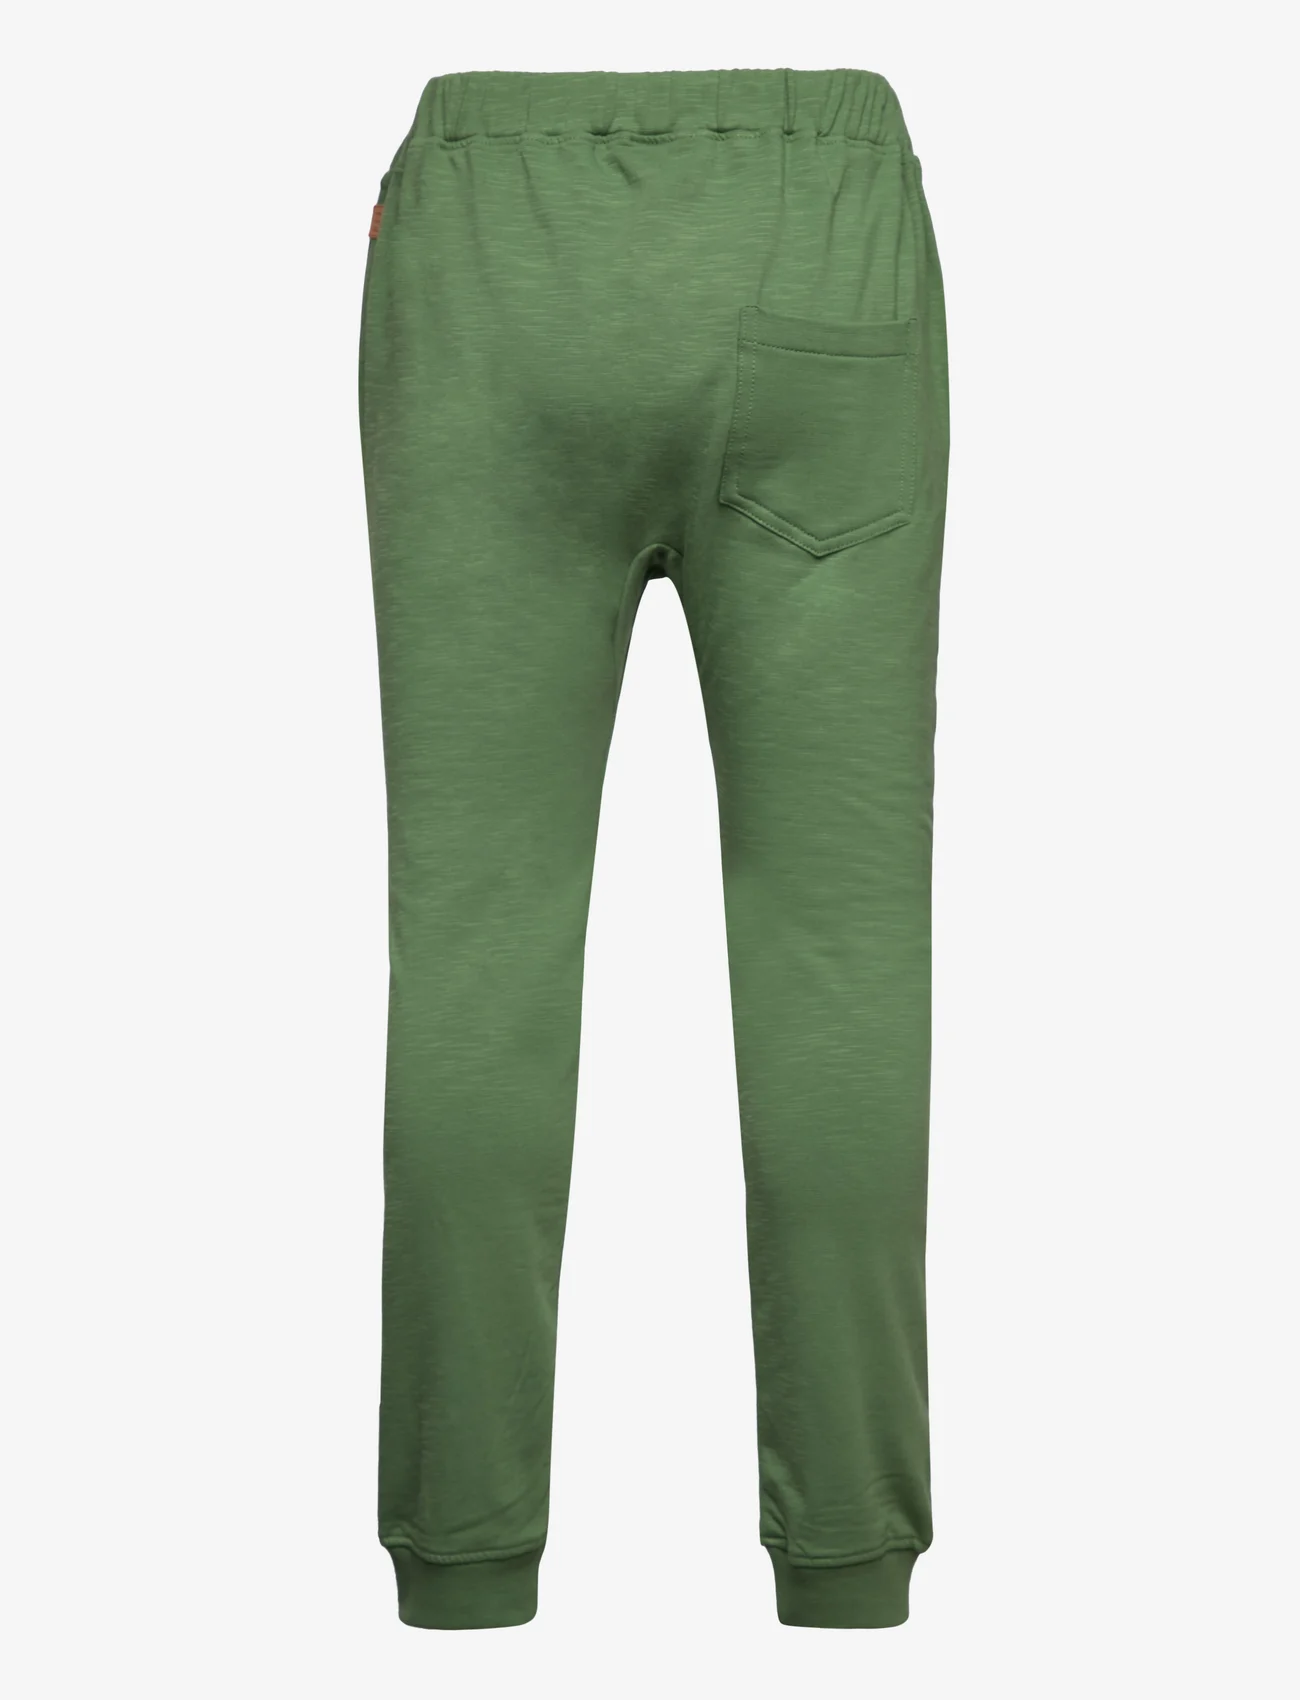 Hust & Claire - Georg - Joggers - lowest prices - elm green - 1